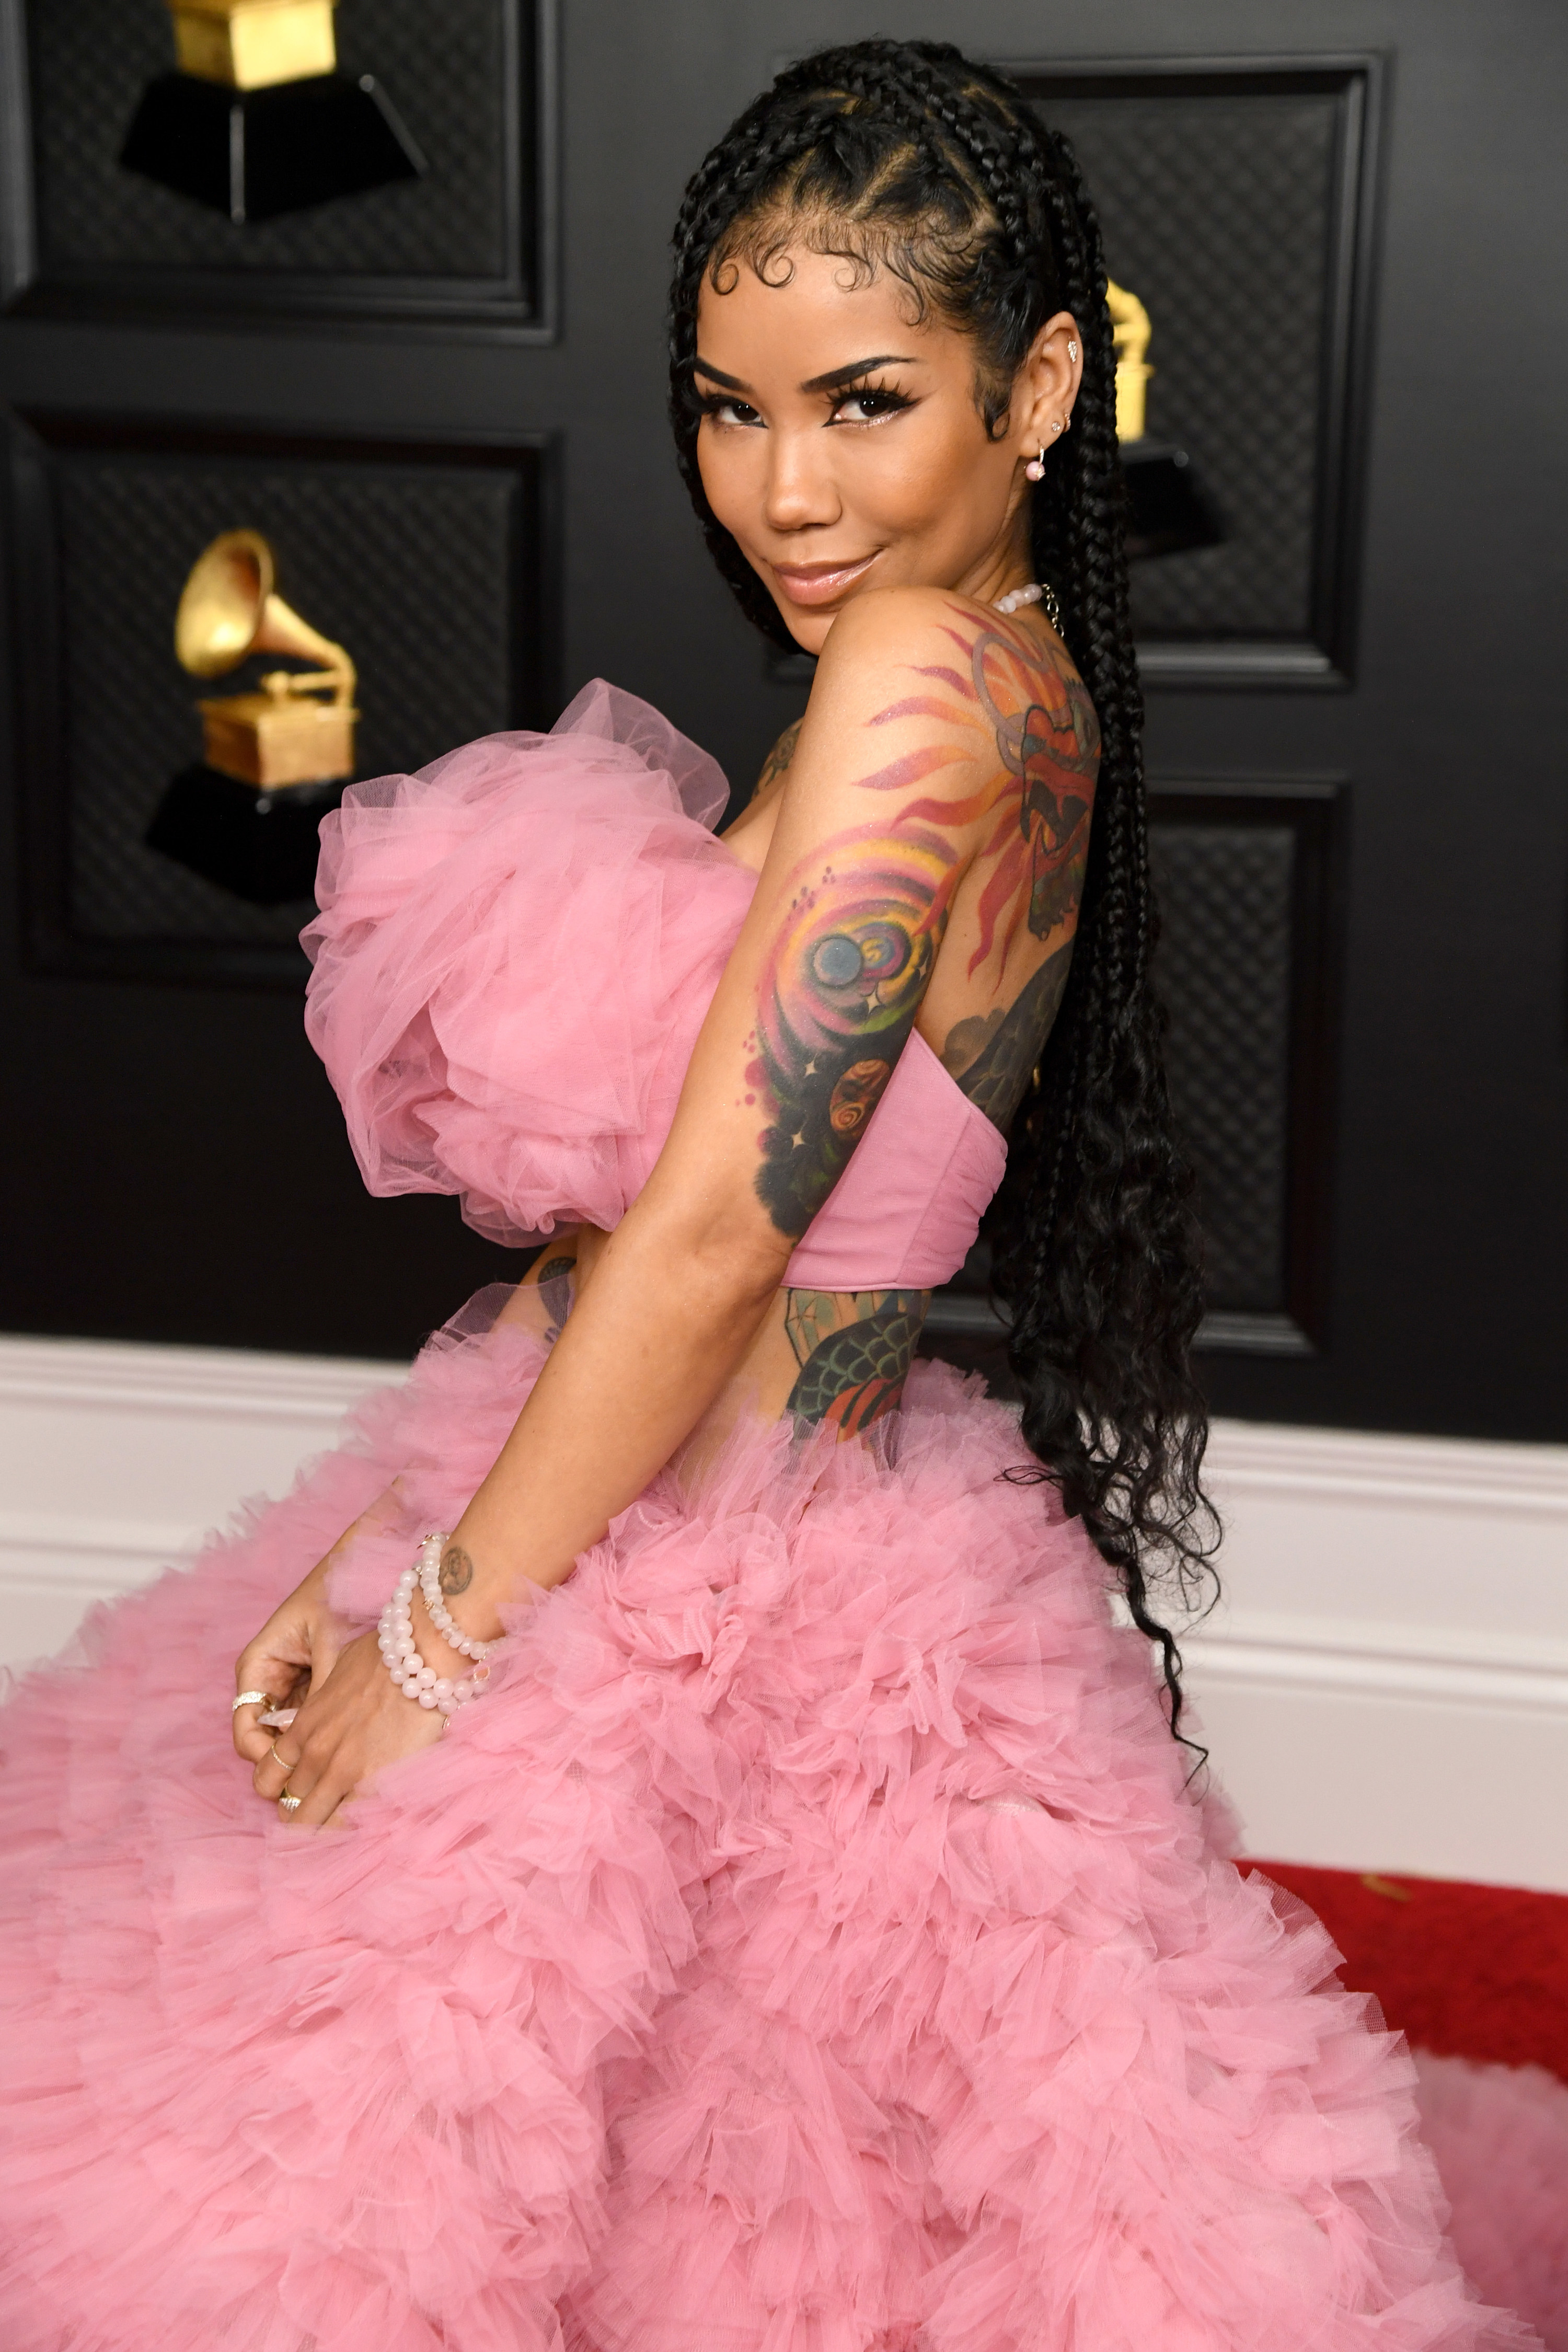 Jhené Aiko poses on the red carpet at the Grammys